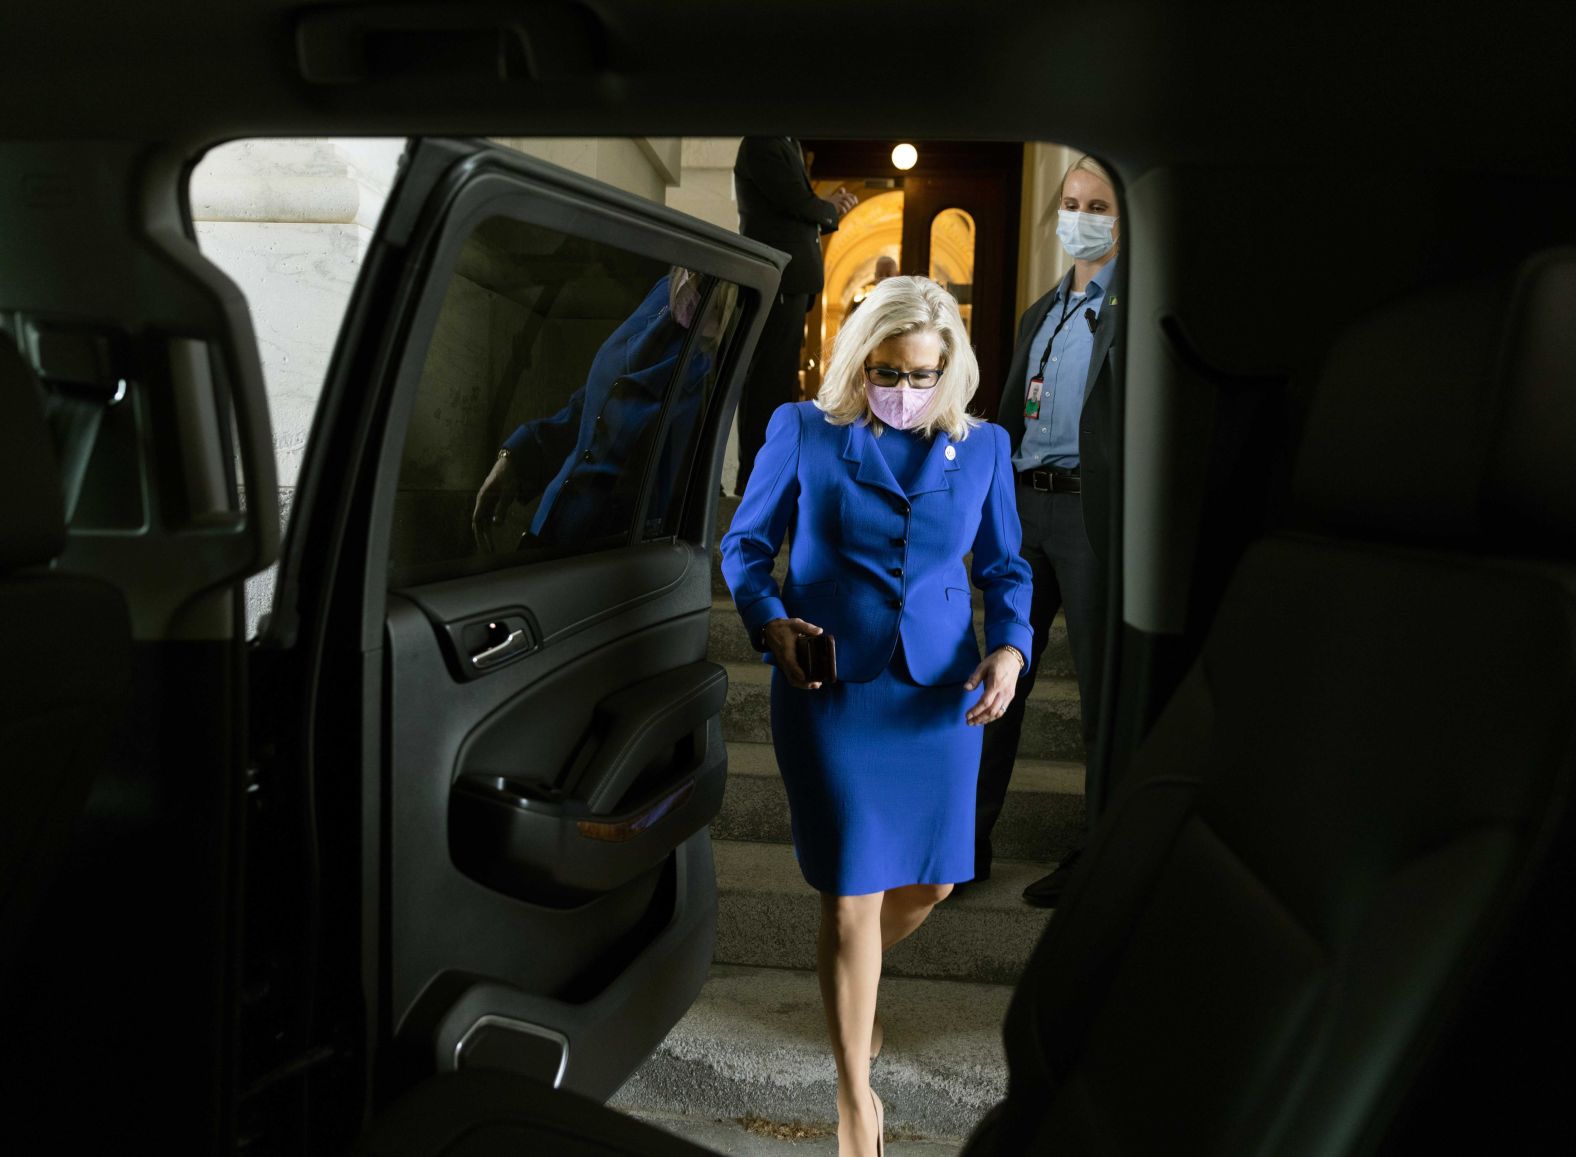 Cheney leaves after Wednesday's vote. Kennerly felt like she was kind of relieved to have it over with. "She definitely wasn't happy about it, but the way she handled it was the way she handles almost everything: deliberate, makes up her mind, follows through," he said.